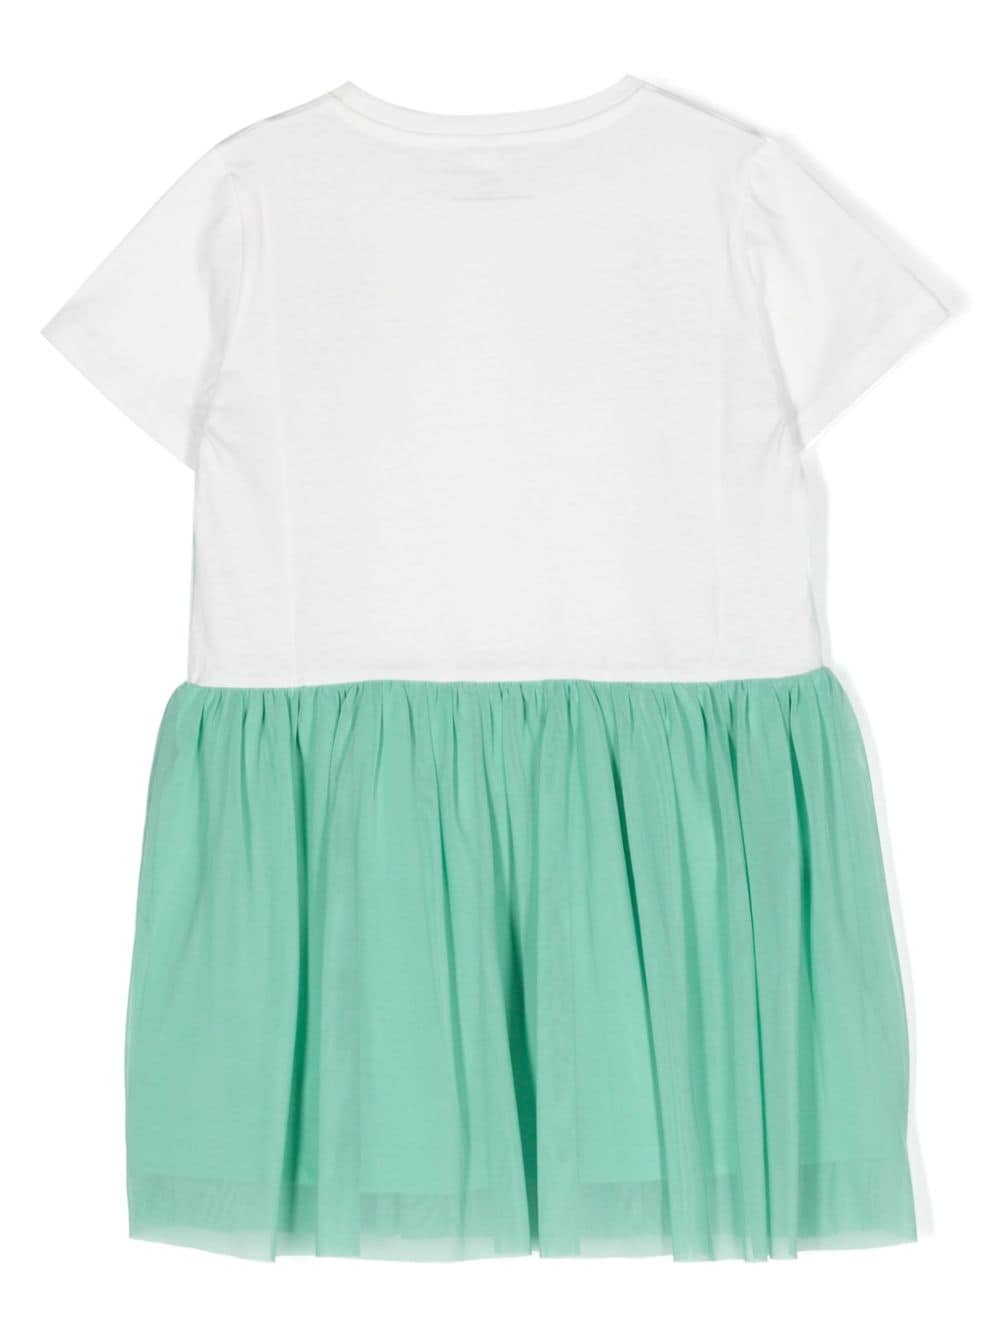 White and green dress for girls